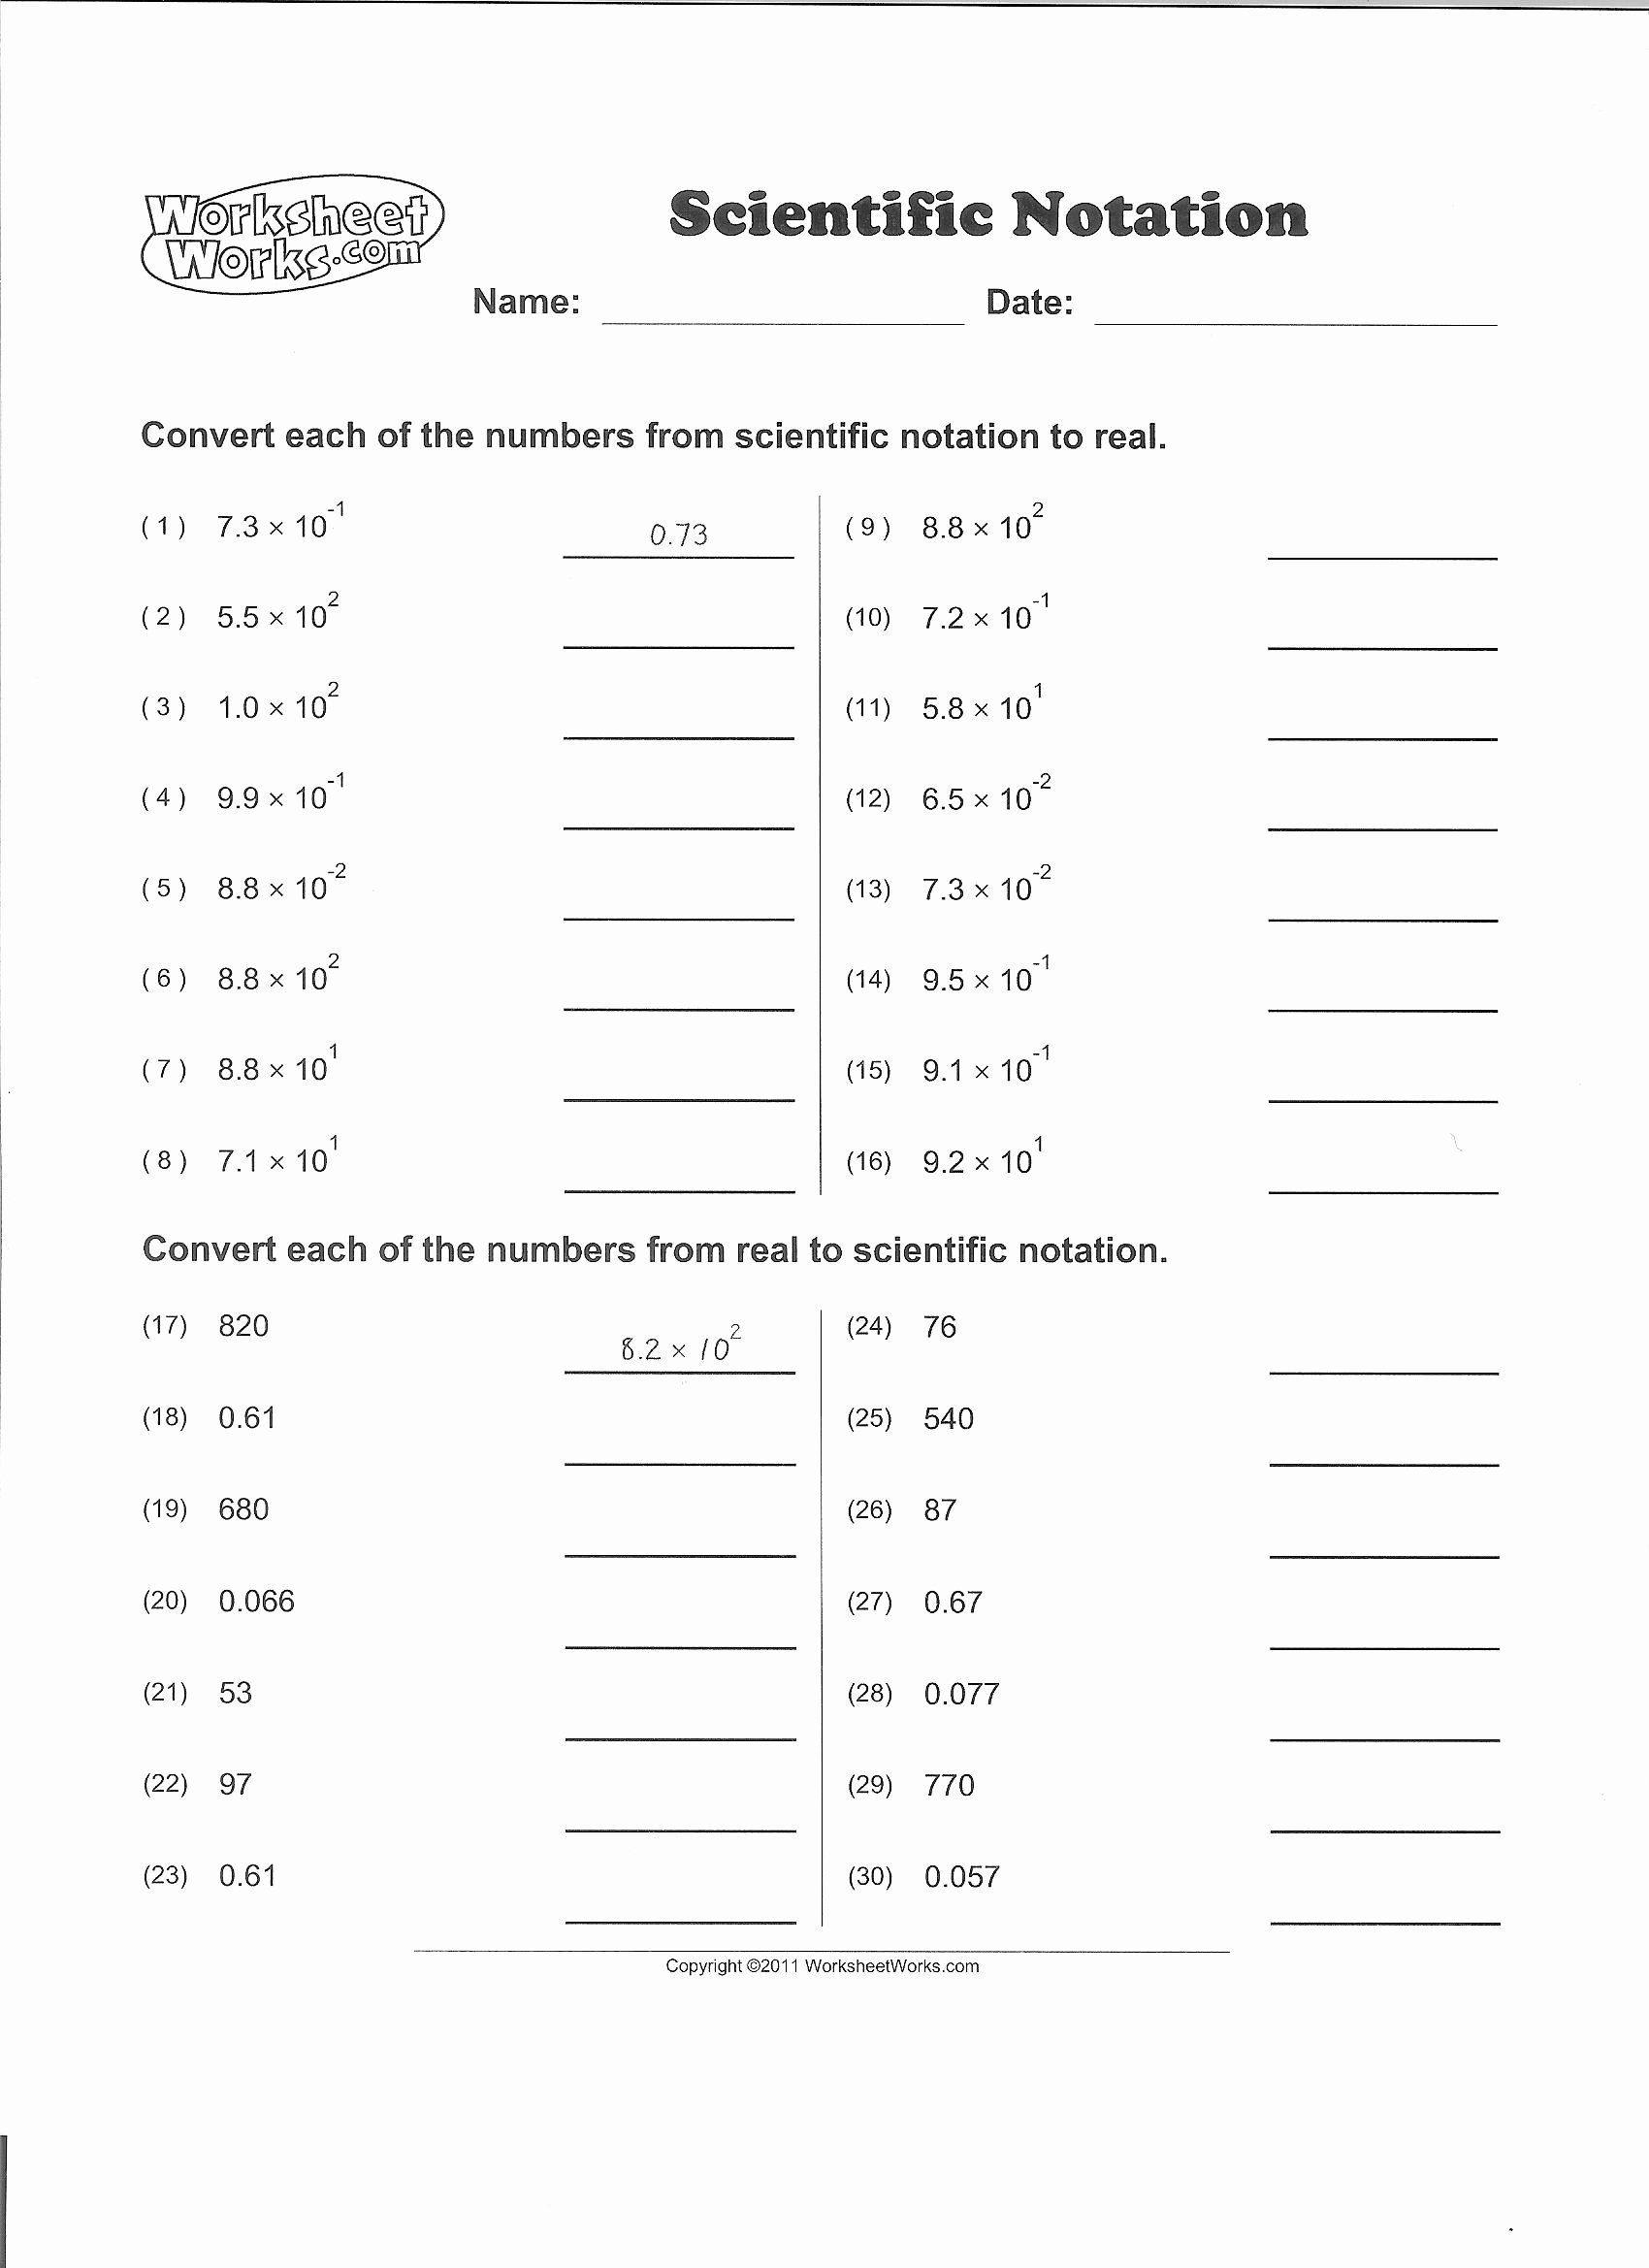 Scientific Notation Worksheet with Answers Beautiful Heritage High Teachers Courses and Files